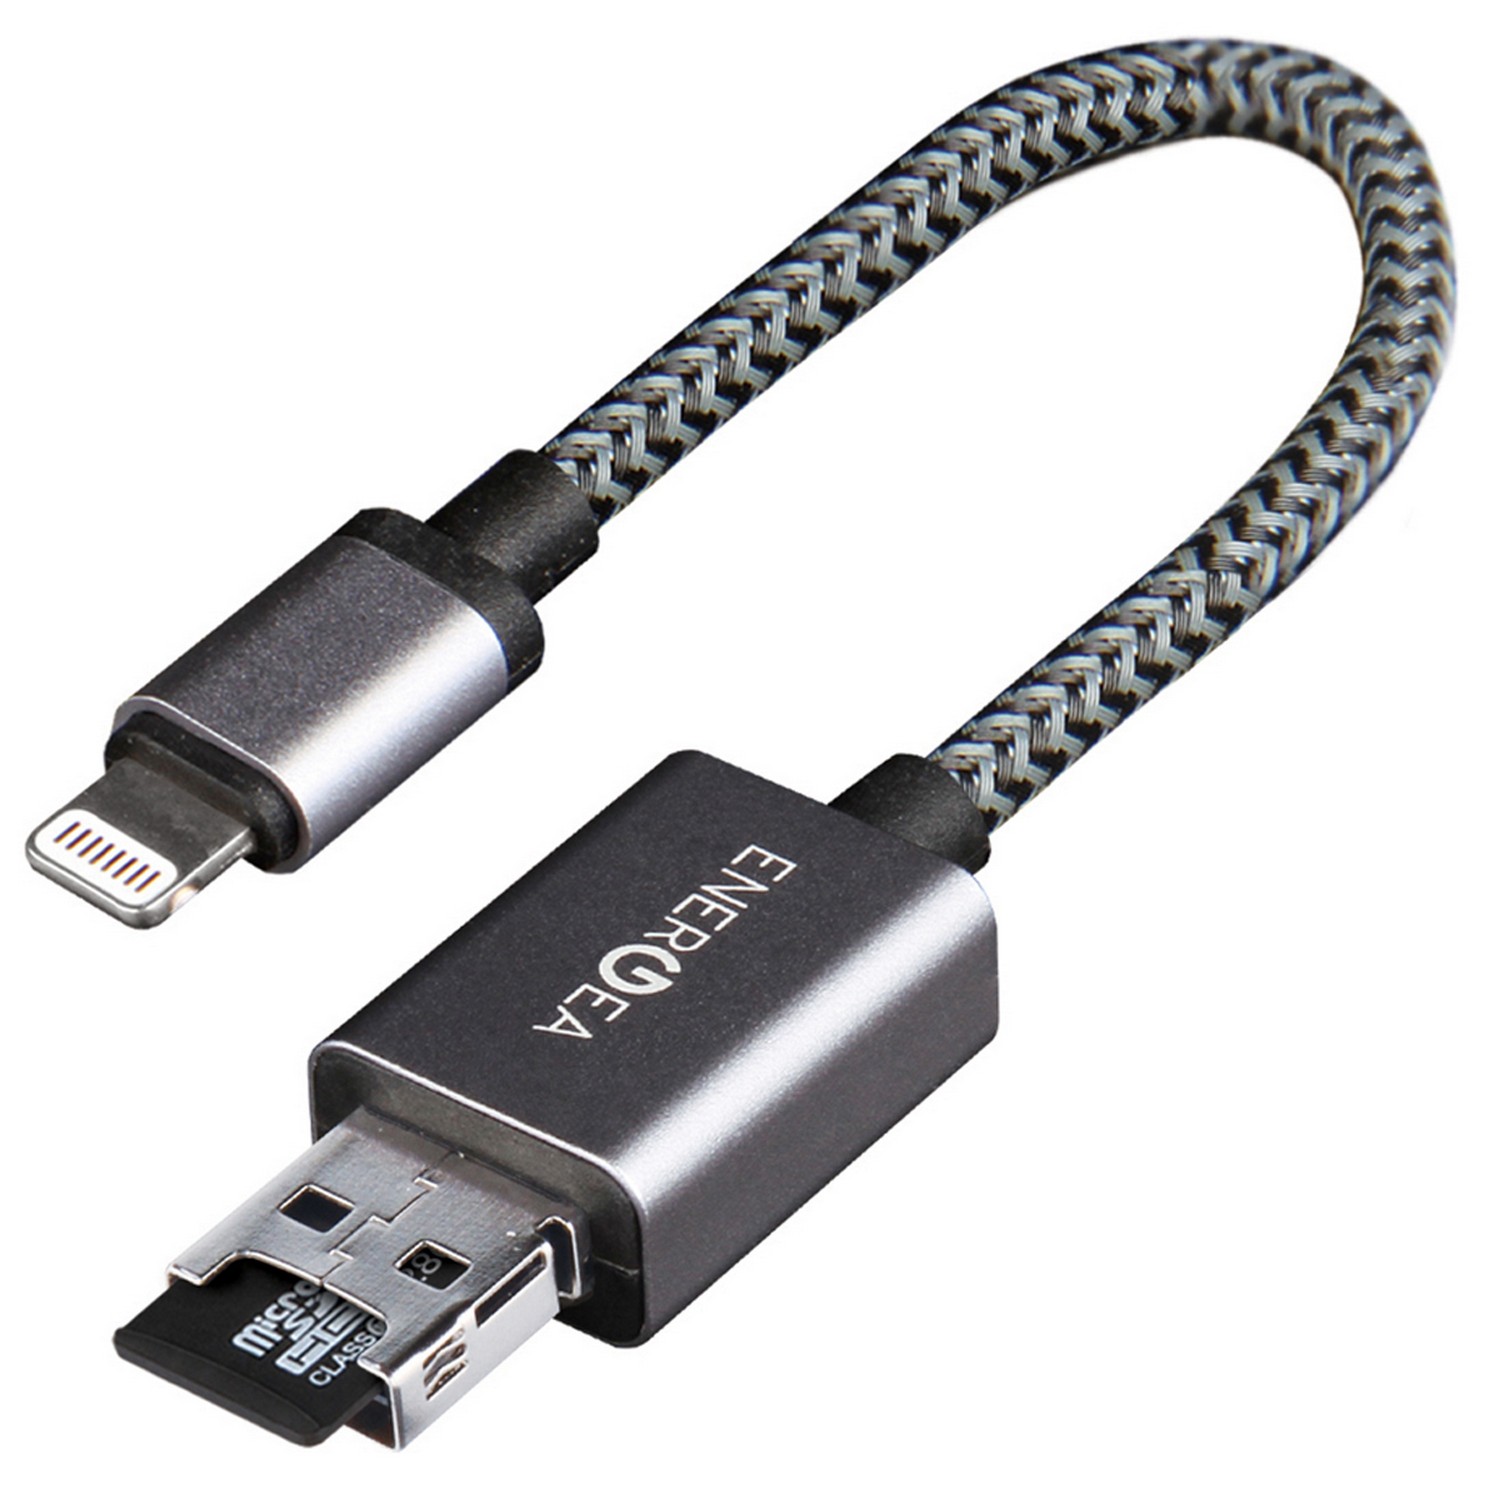 Energea Lightning Cable AluMemo Expandable Memory 